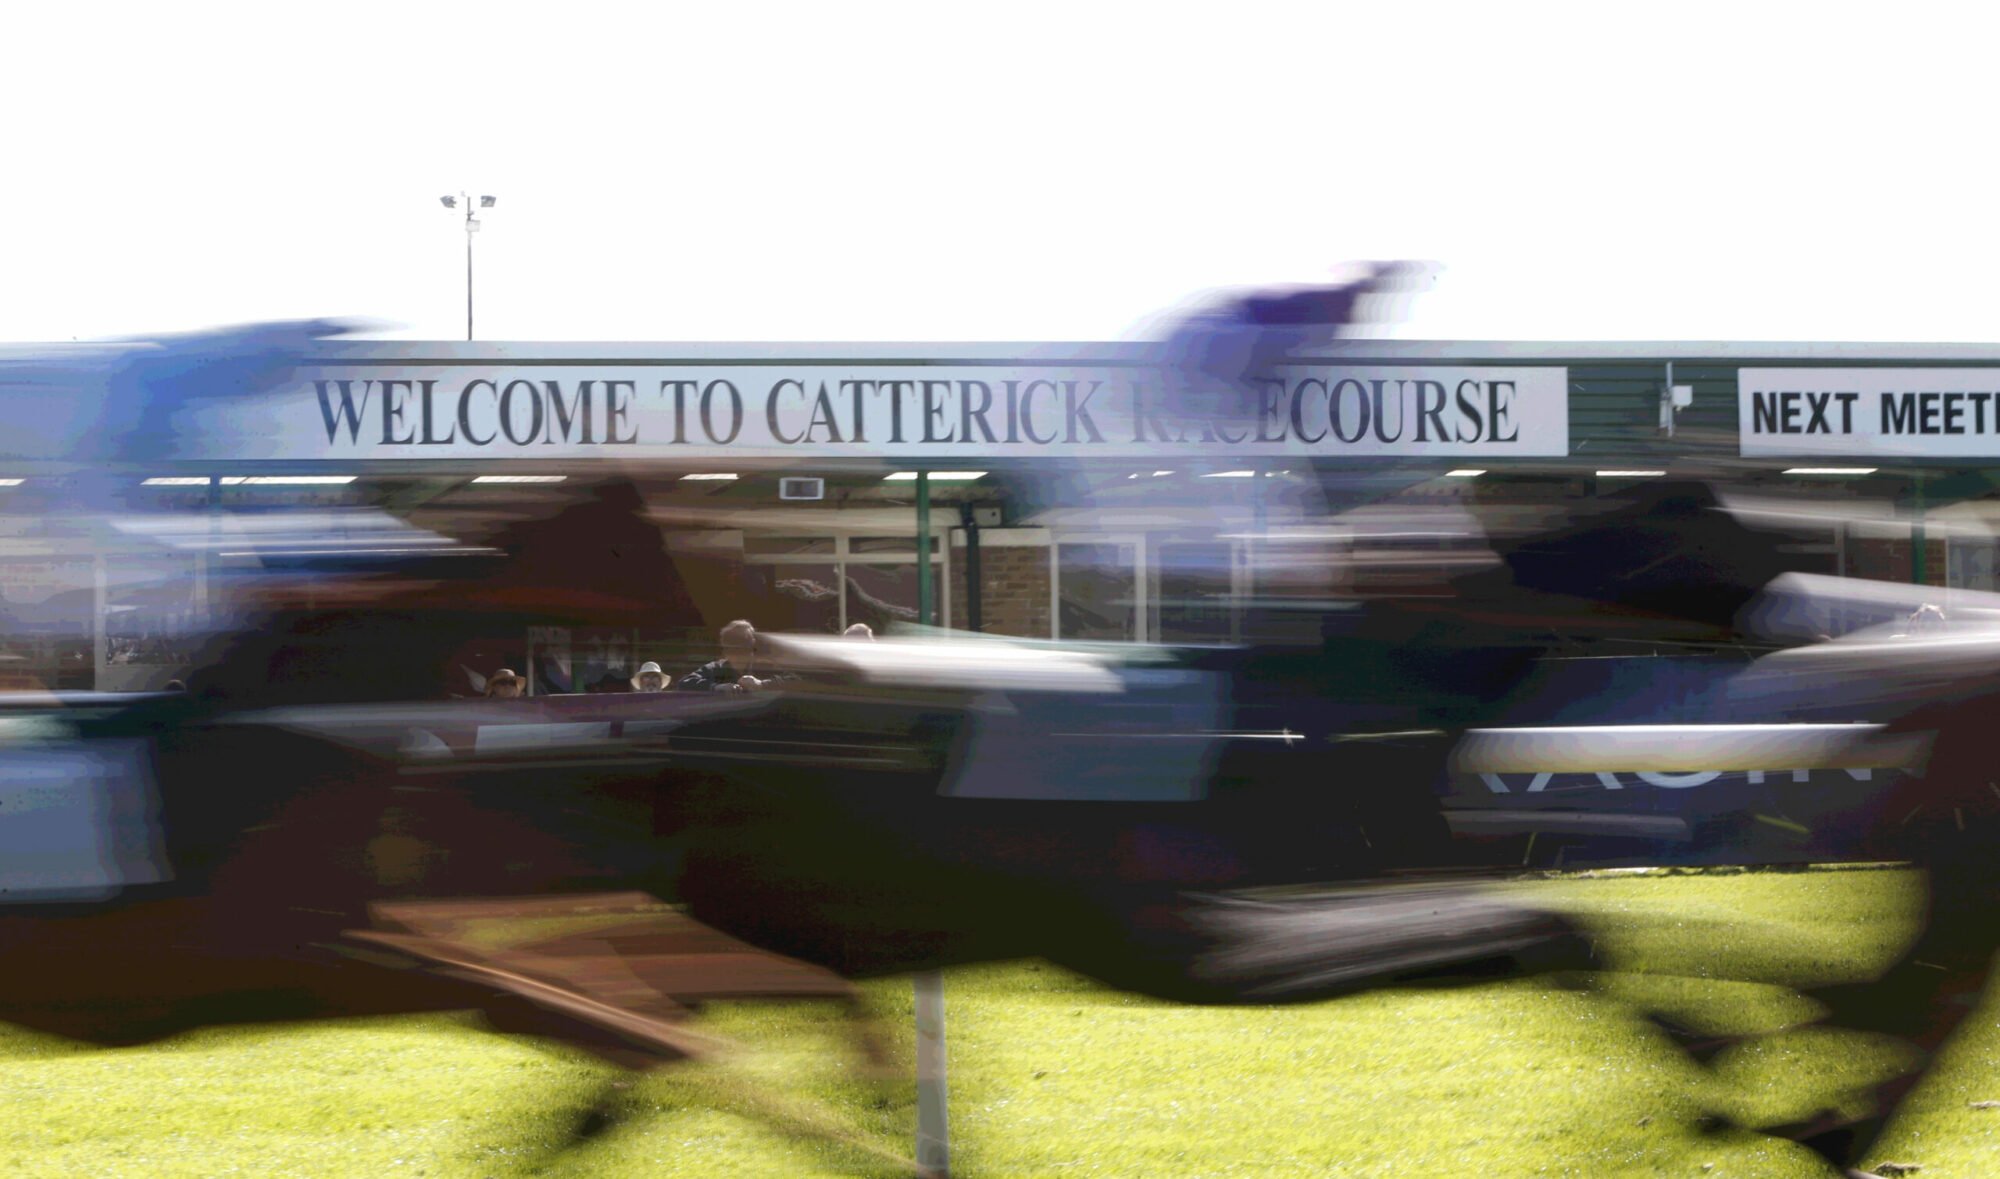 Image name Catterick Italian Riviera 001 D7X1843 scaled the 7 image from the post Catterick Jump Race at Catterick Racecourse on Tuesday, December 19, 2023 in Yorkshire.com.